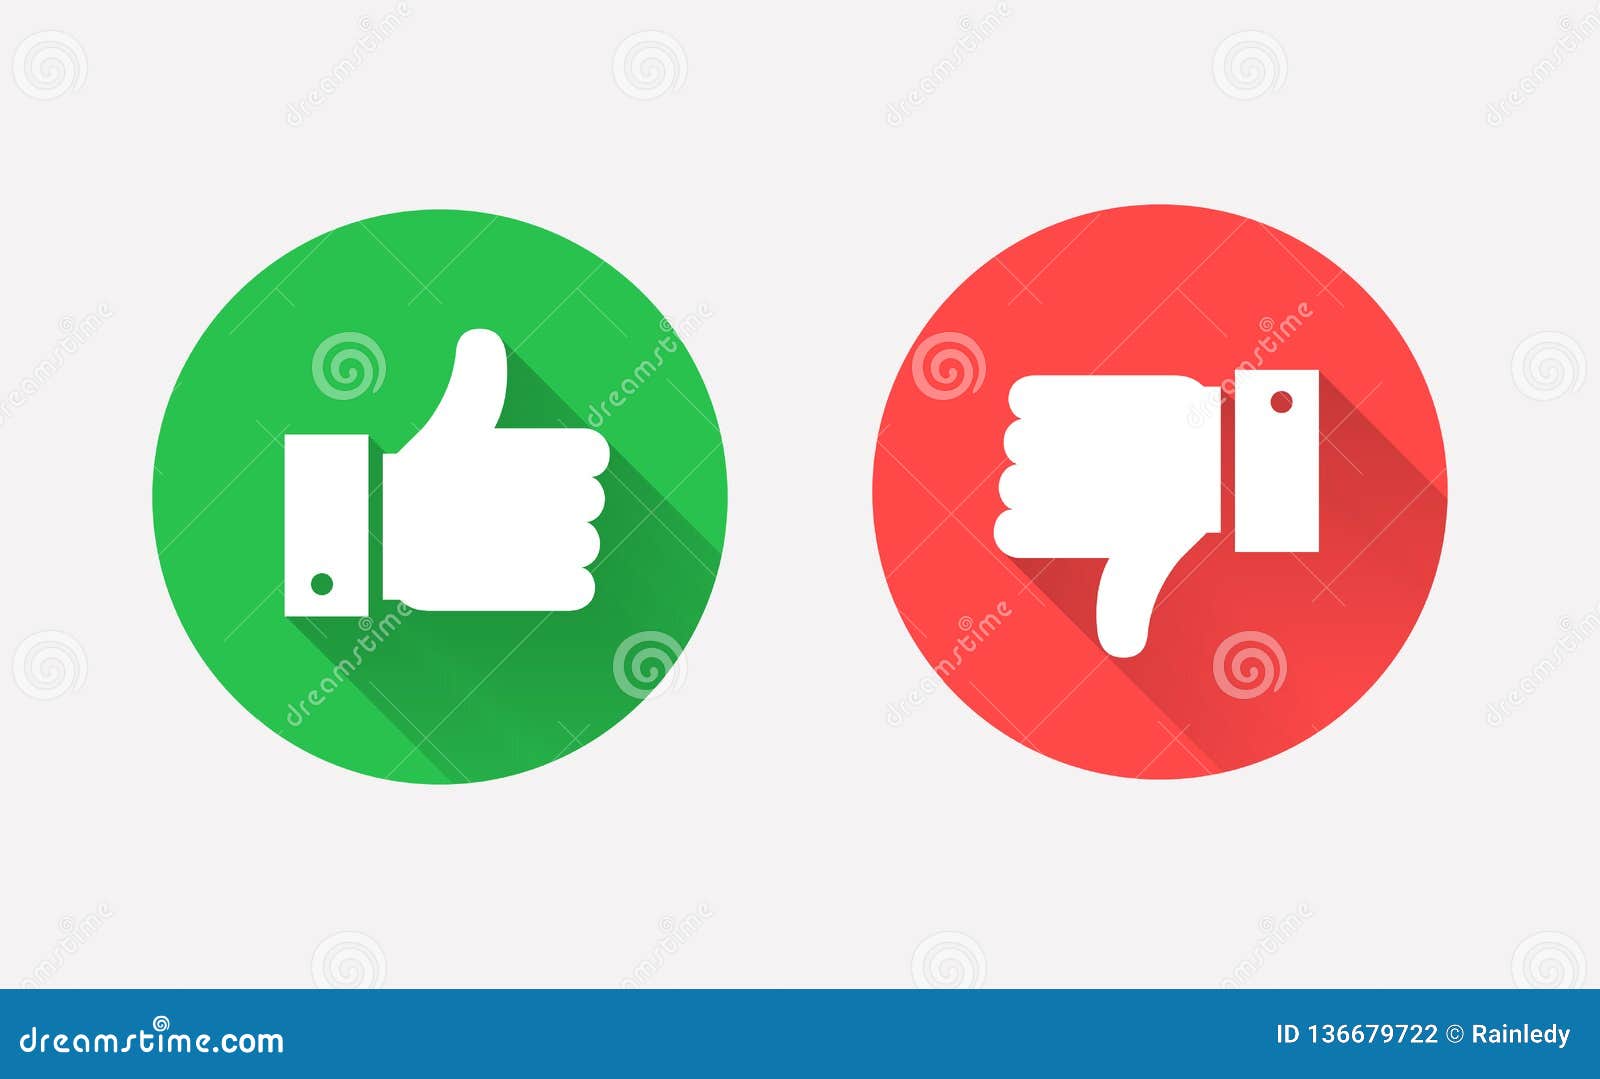 thumbs up and down flat icon in circle s